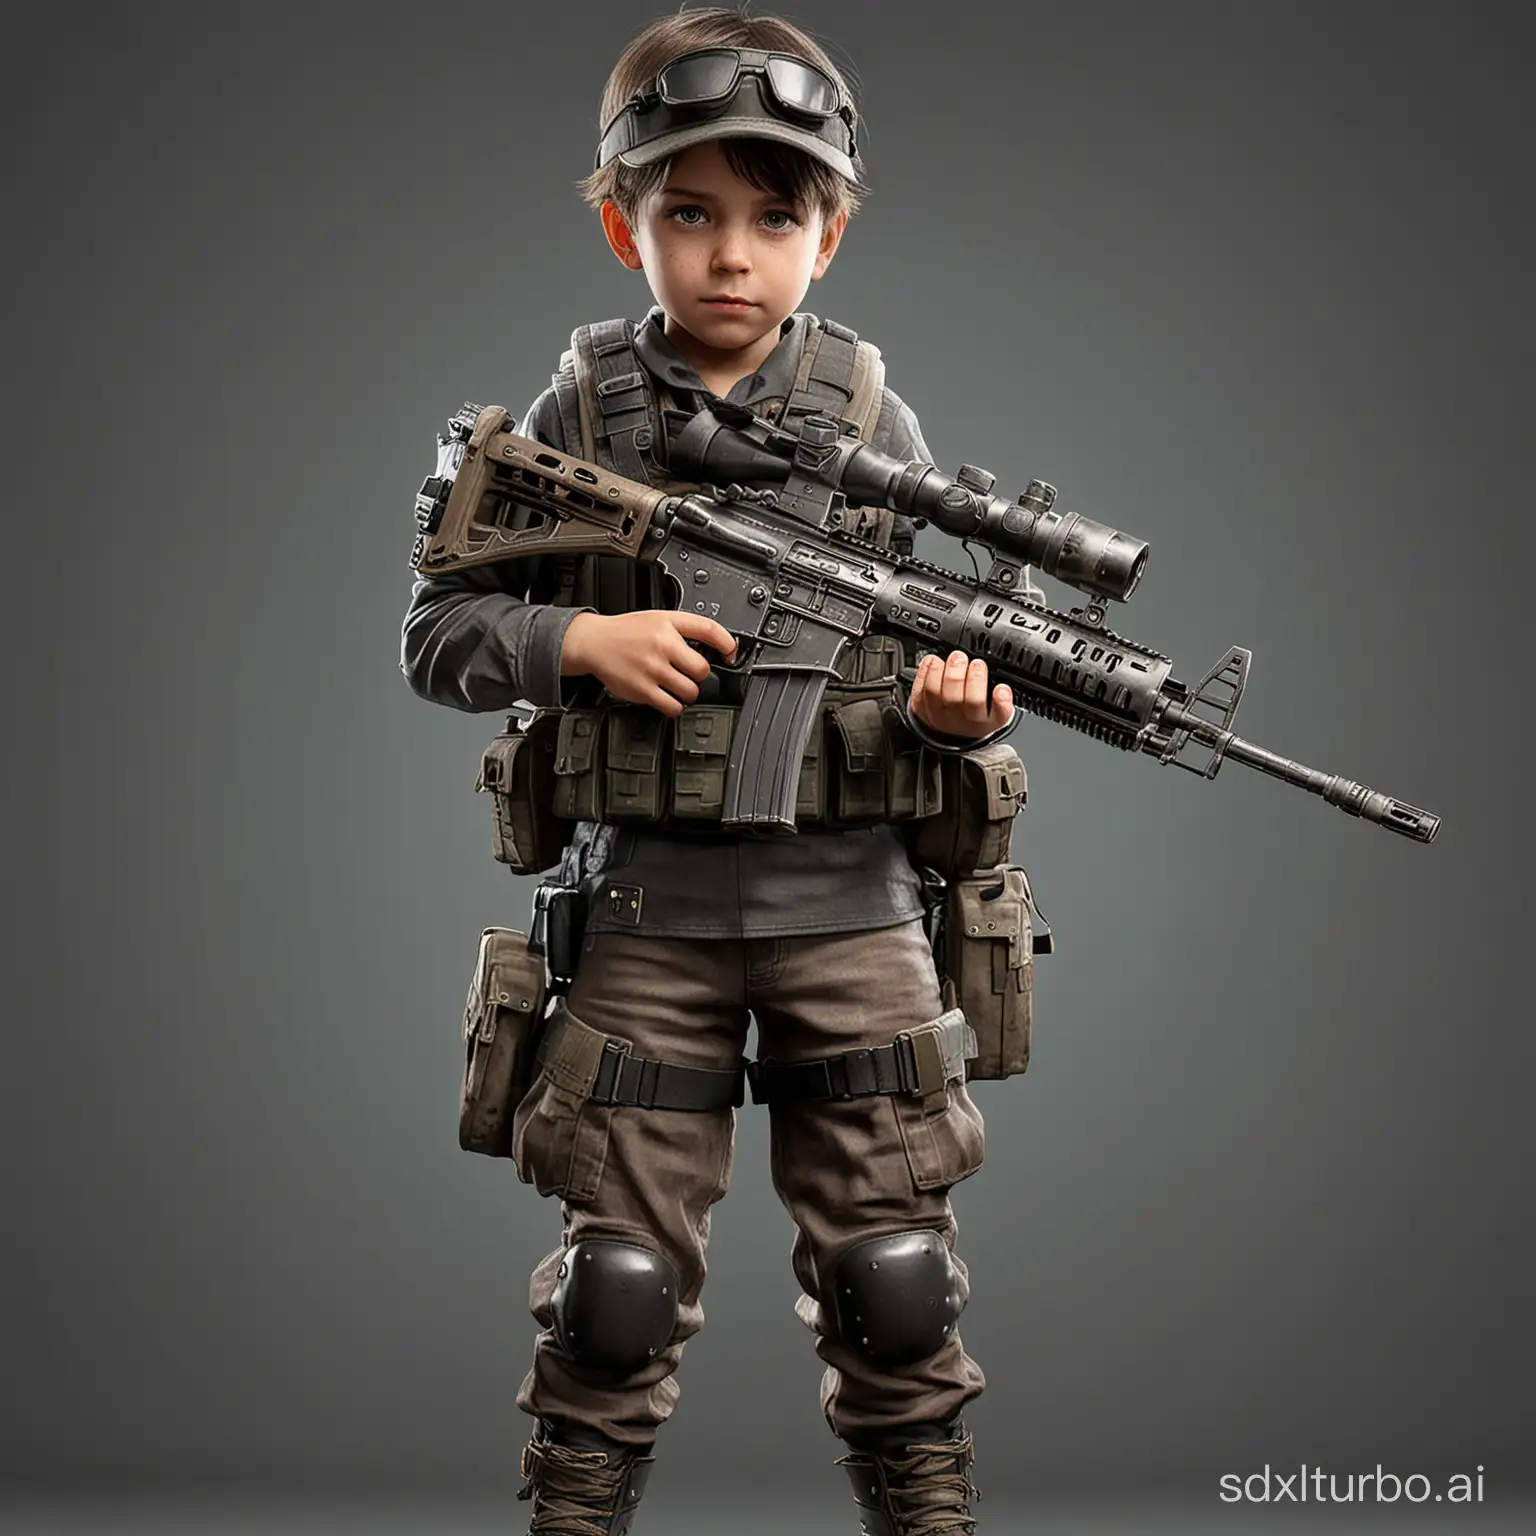 Young-PUBG-Character-in-Full-Armor-with-M416-Assault-Rifle